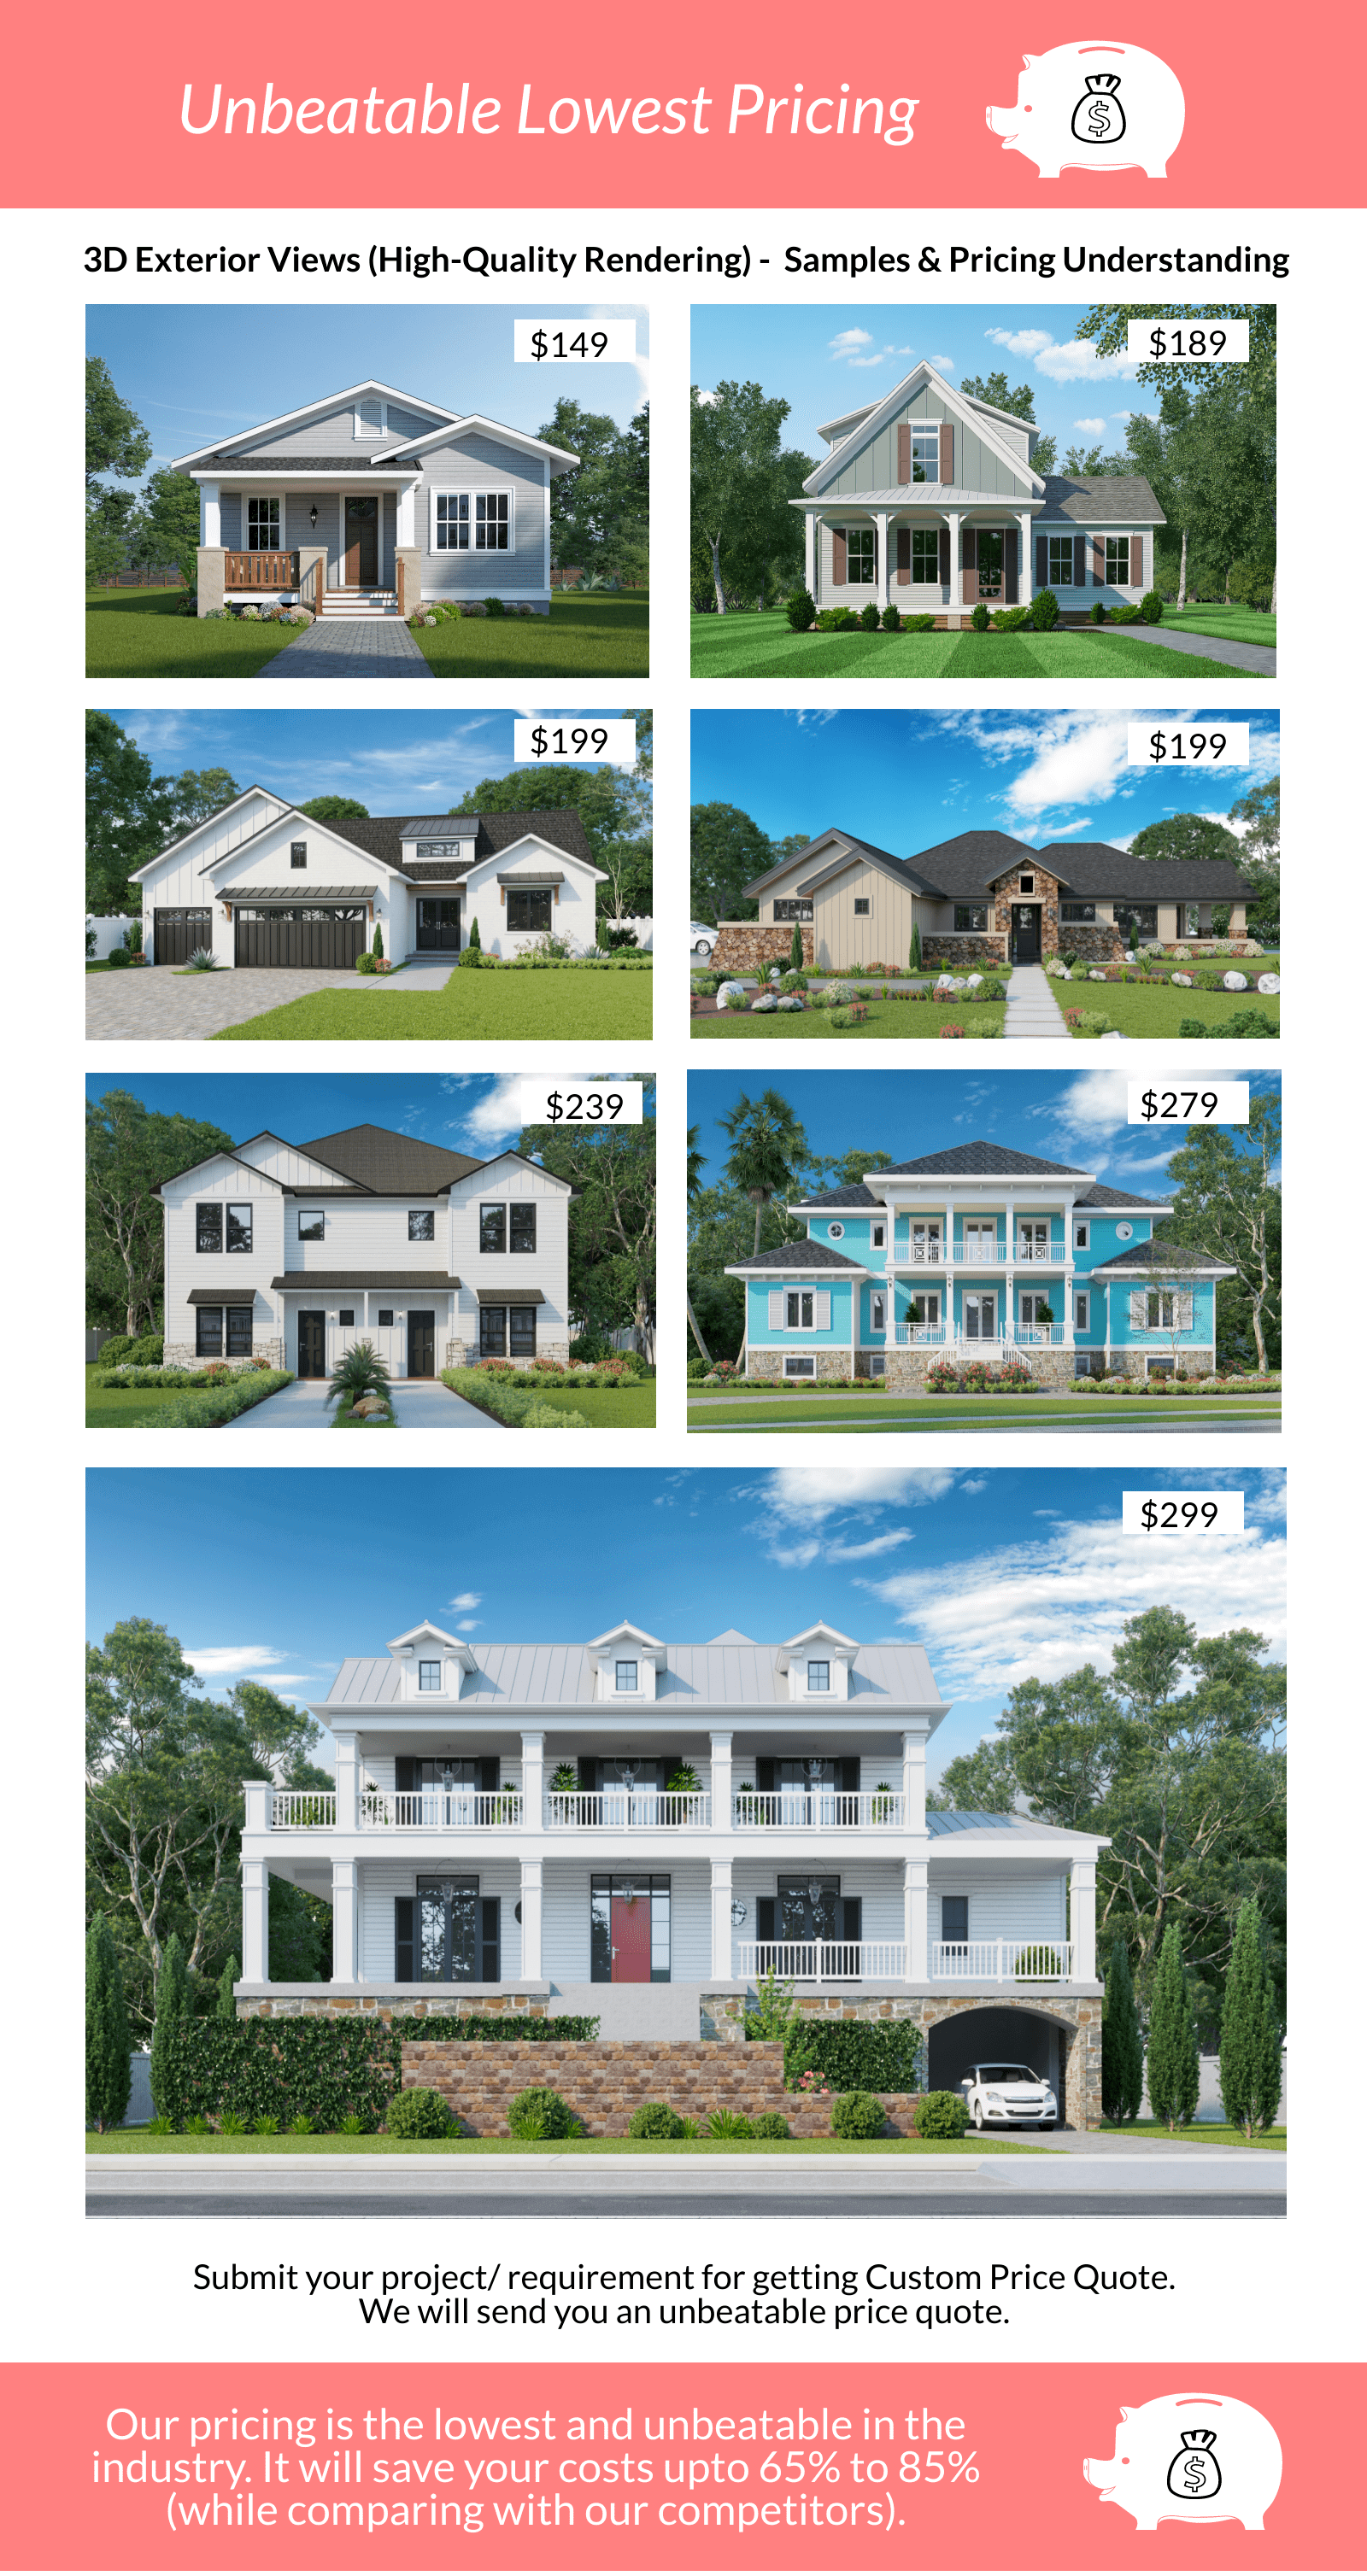 Real-Estate-Rendering-Price-Cost-3D-exteriors